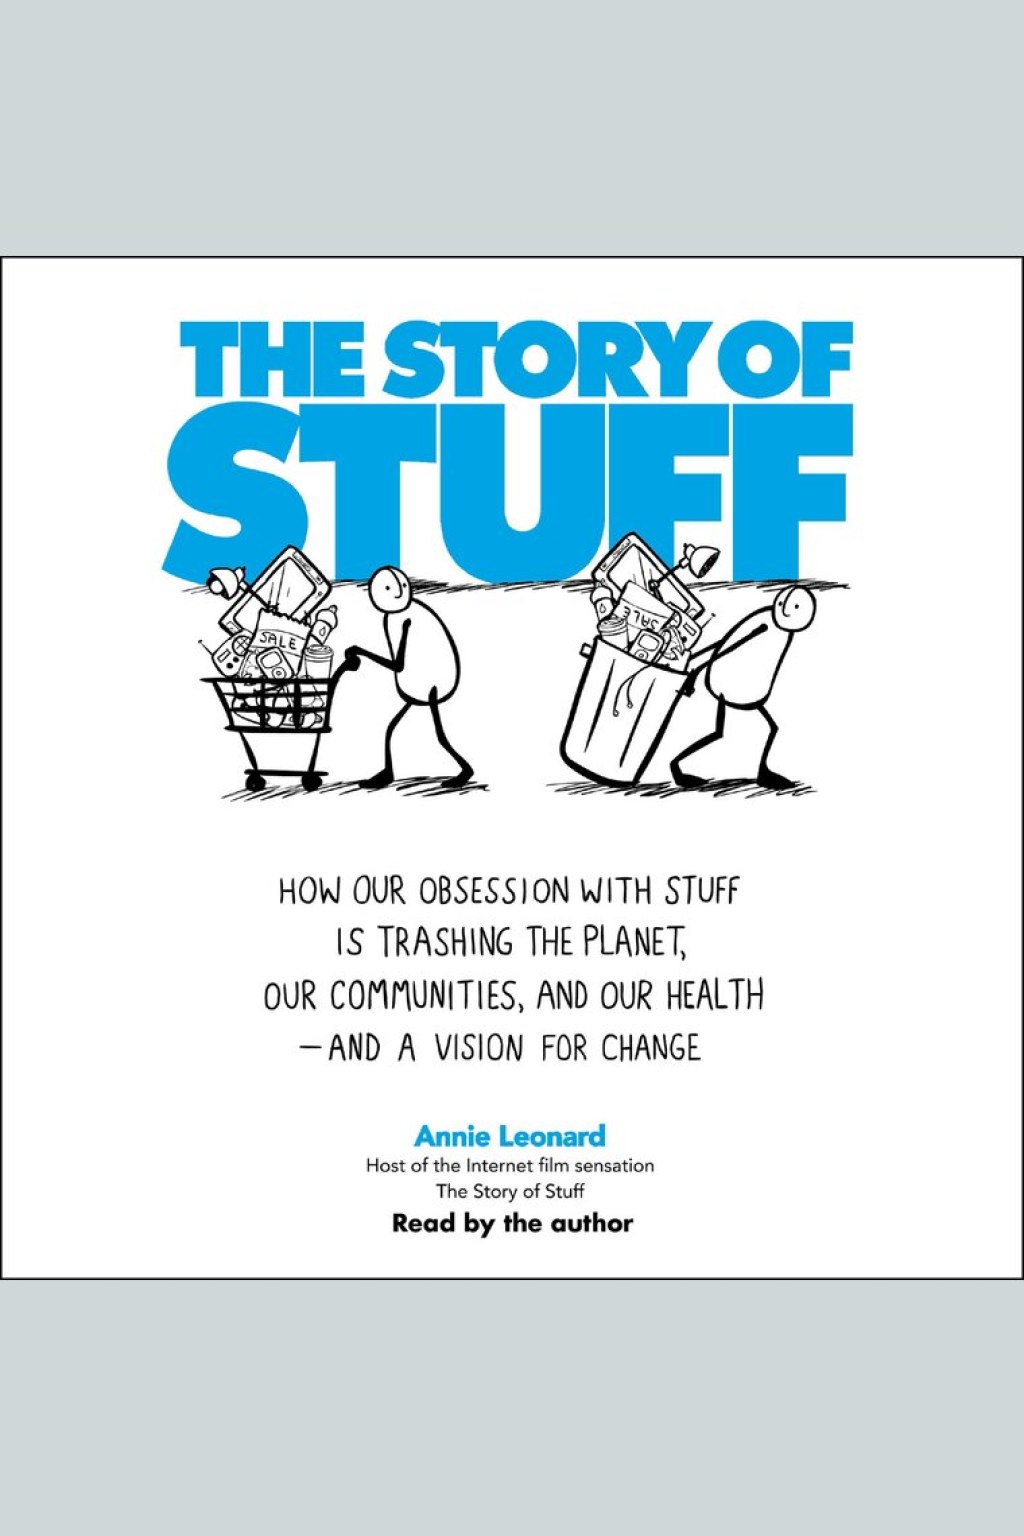 Picture of: The Story of Stuff by Annie Leonard – Audiobook  Scribd